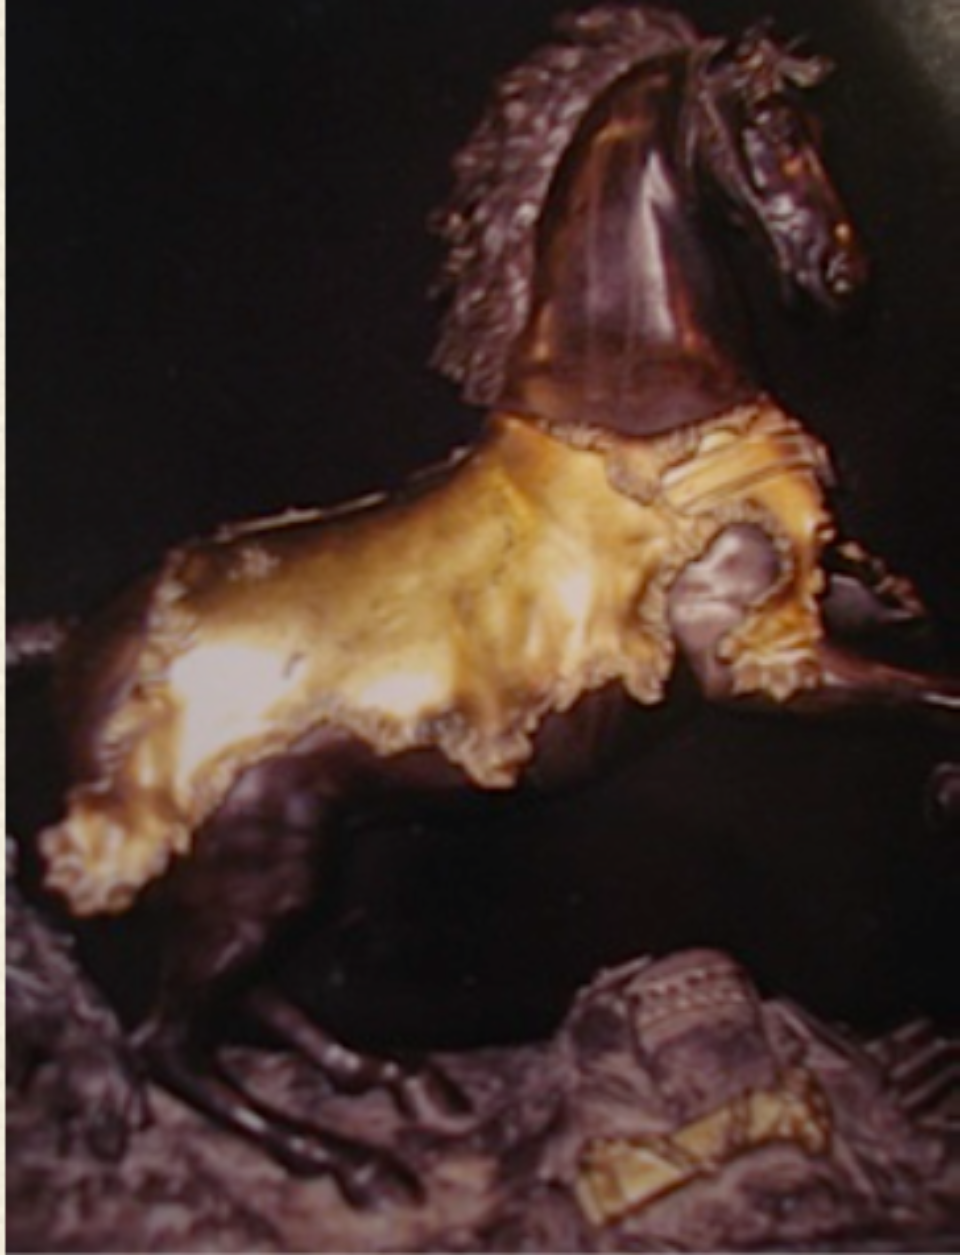 Adelicia purchased the small bronze statue of Bucephalus below, which can be seen in the small study at the Belmont Mansion.